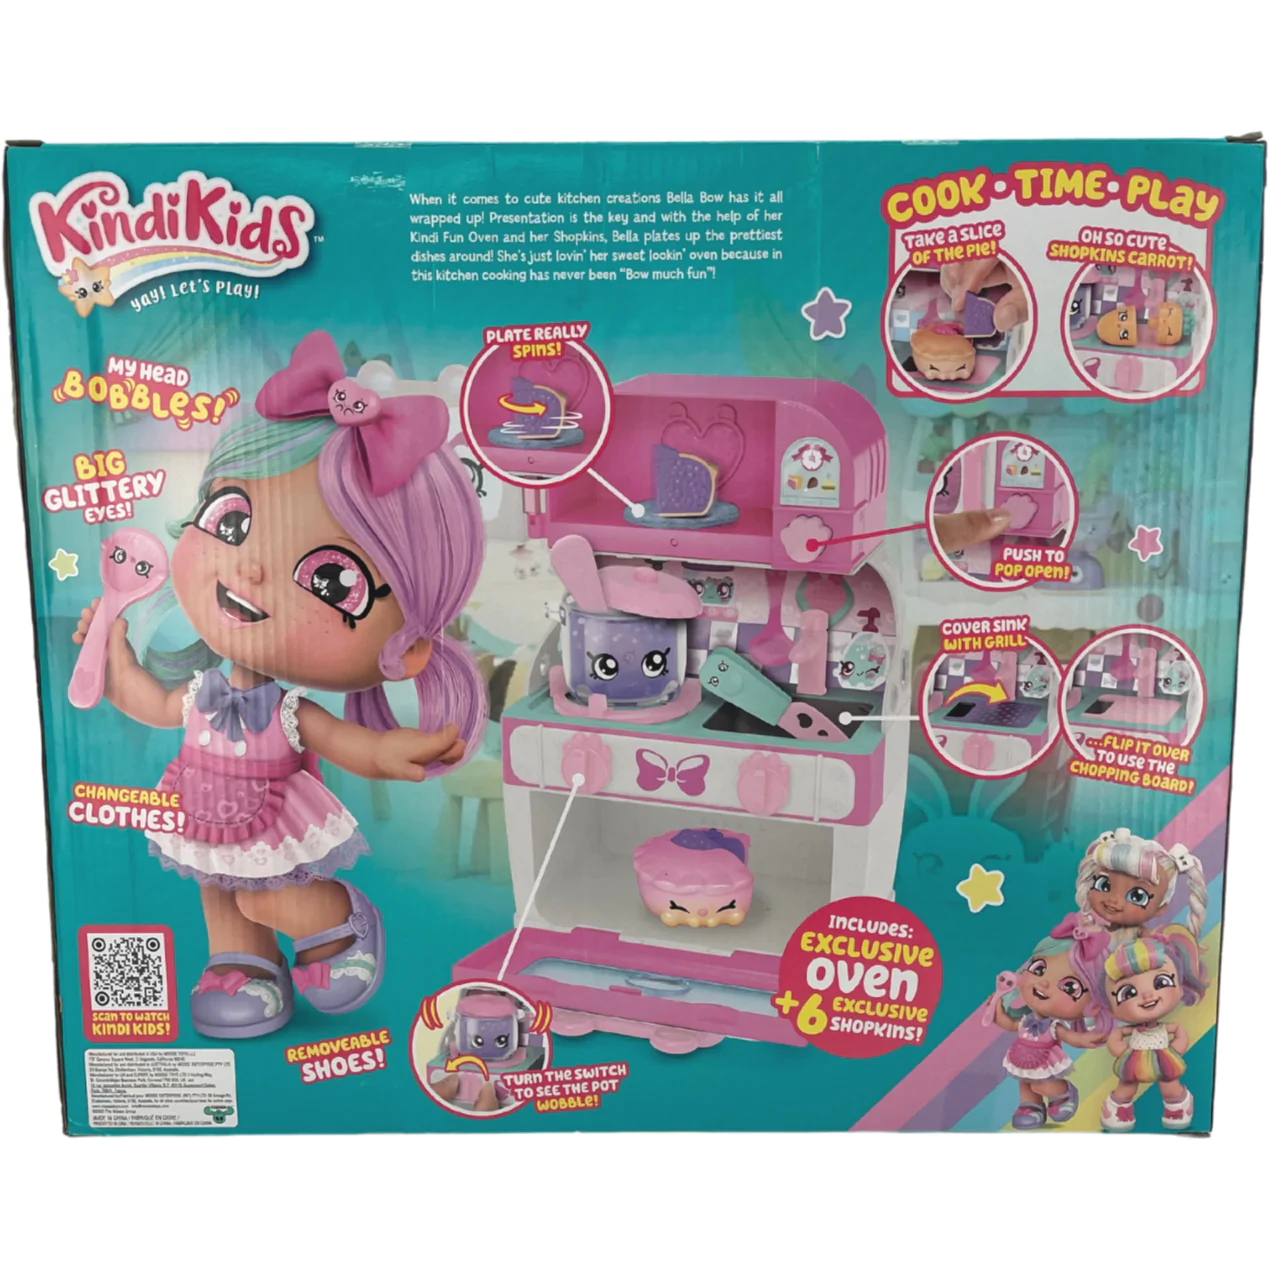 Kindi Kids Bella Bow & Kindi Fun Oven Play Set / Doll with 6 Shopkins / For  Ages 3+